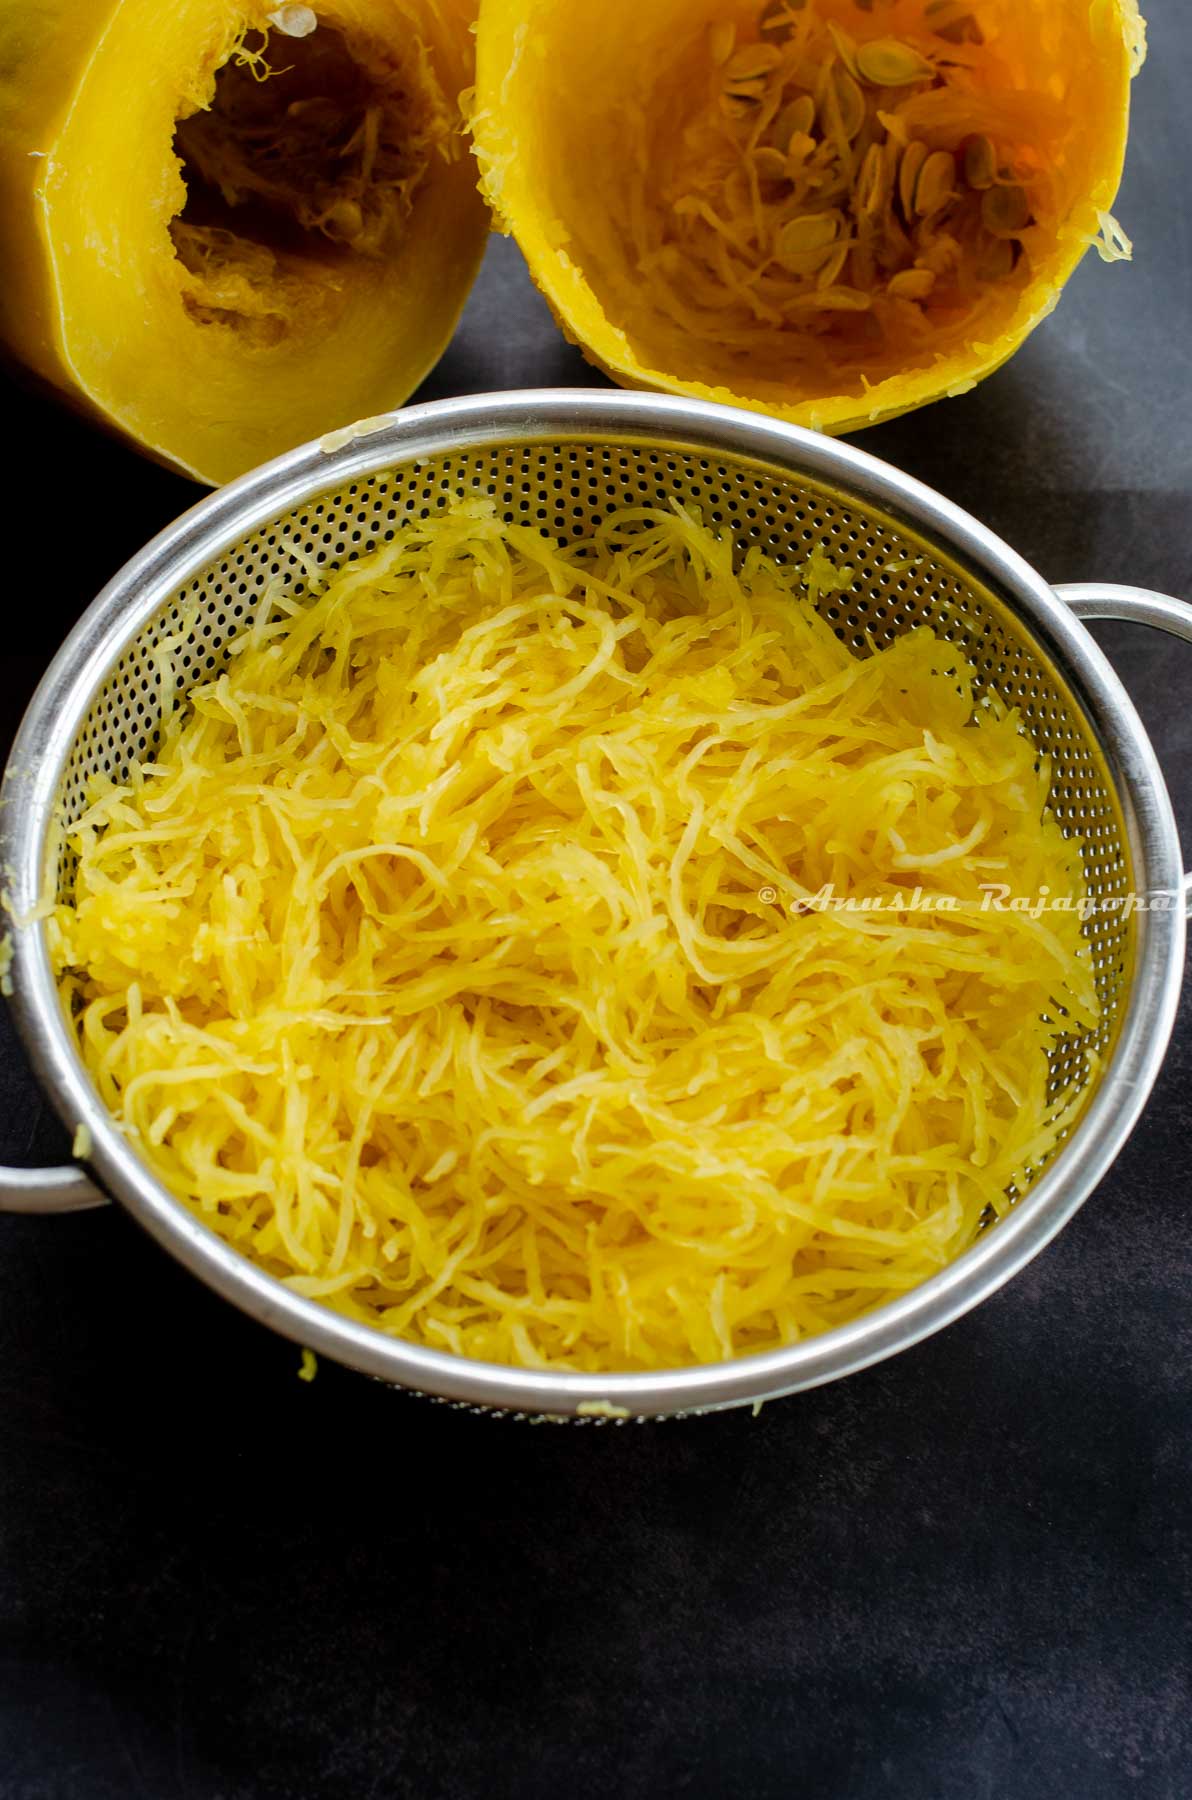 Spaghetti squash cooked in the instant pot drained in a colander